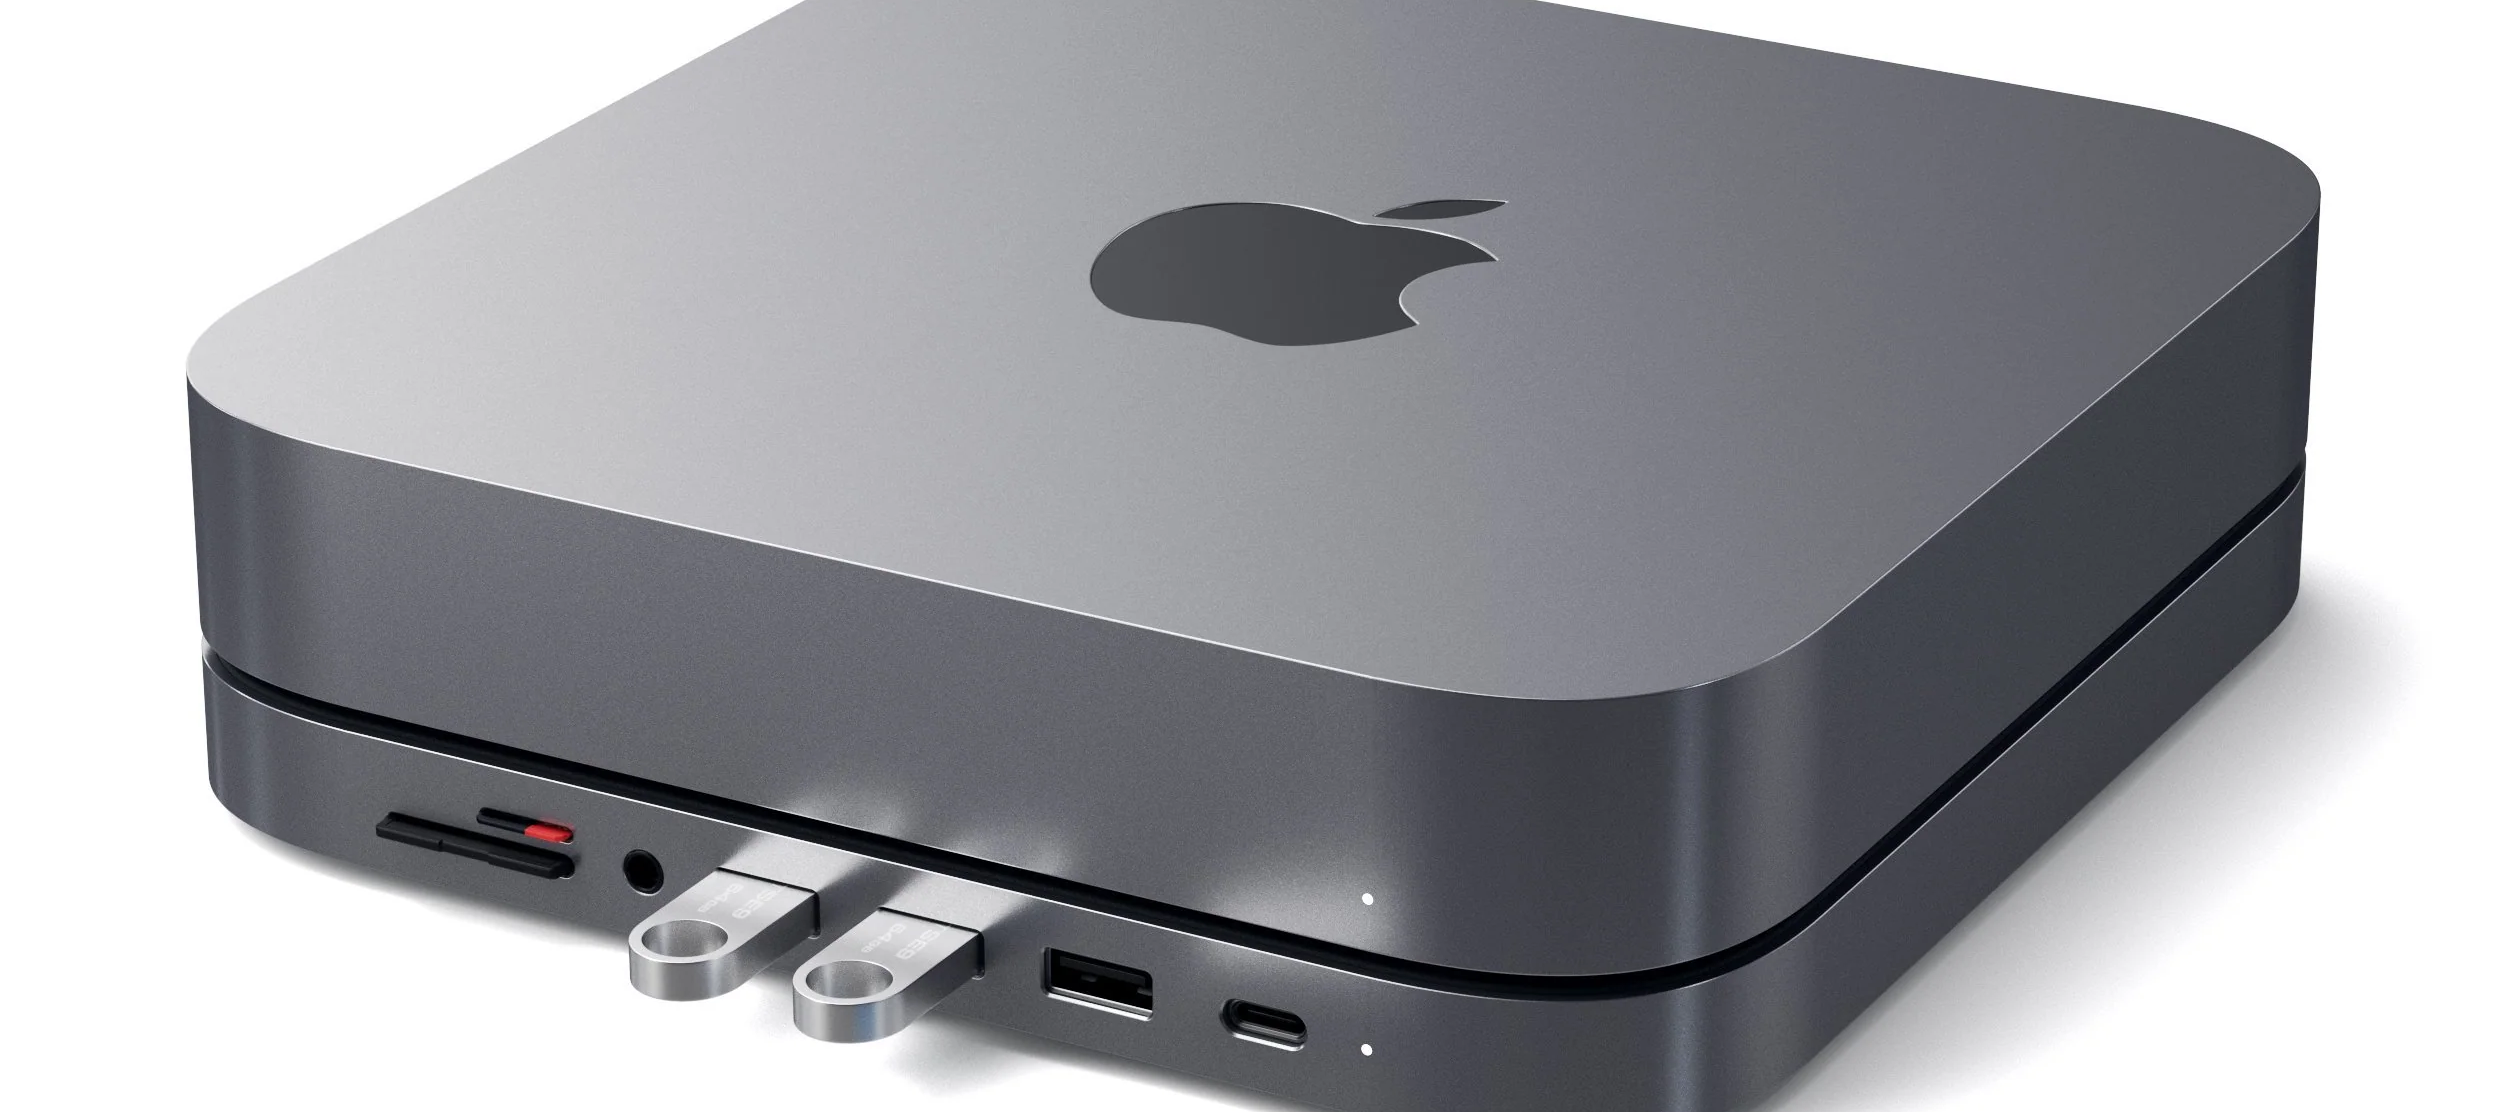 Top 3 USB-C Hubs with SSD Support For Apple Mac mini [List]